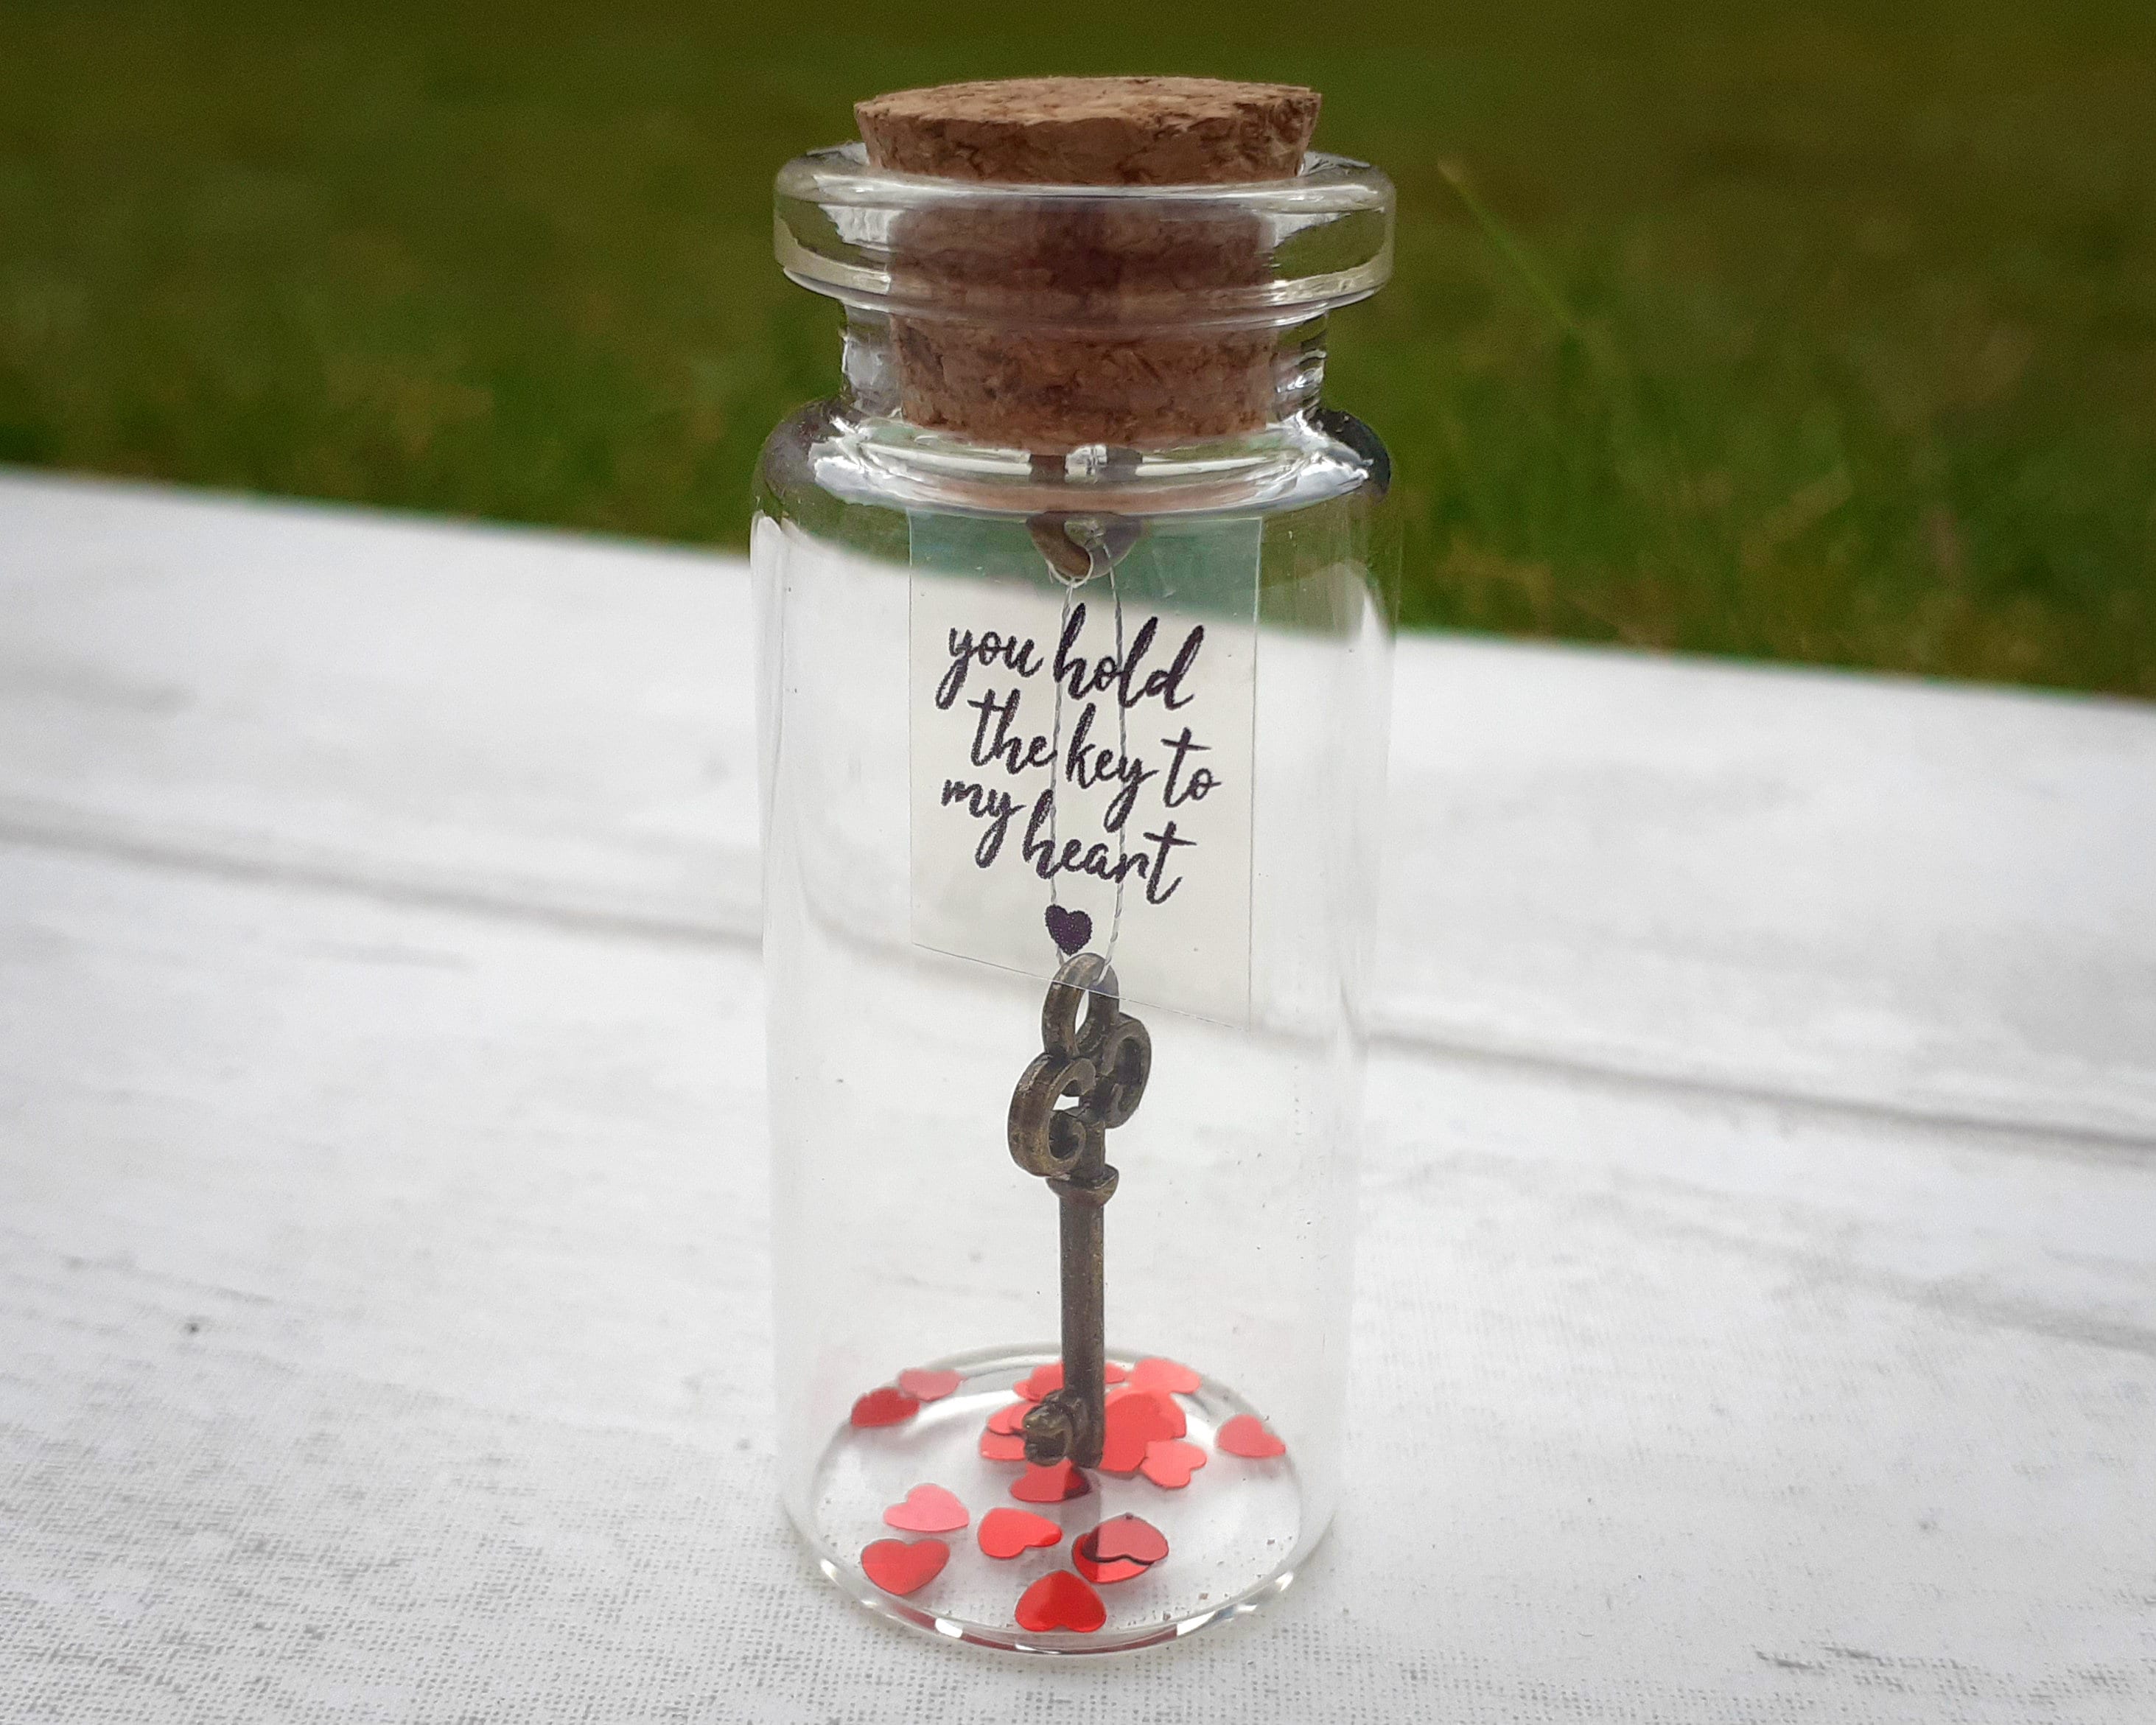 You Hold The Key to My Heart Wish Jar with a Card for Husband or Wife Romantic Message in a Bottle to Give Boyfriend or Girlfriend Key in a bottle, You Hold The Key to My Heart